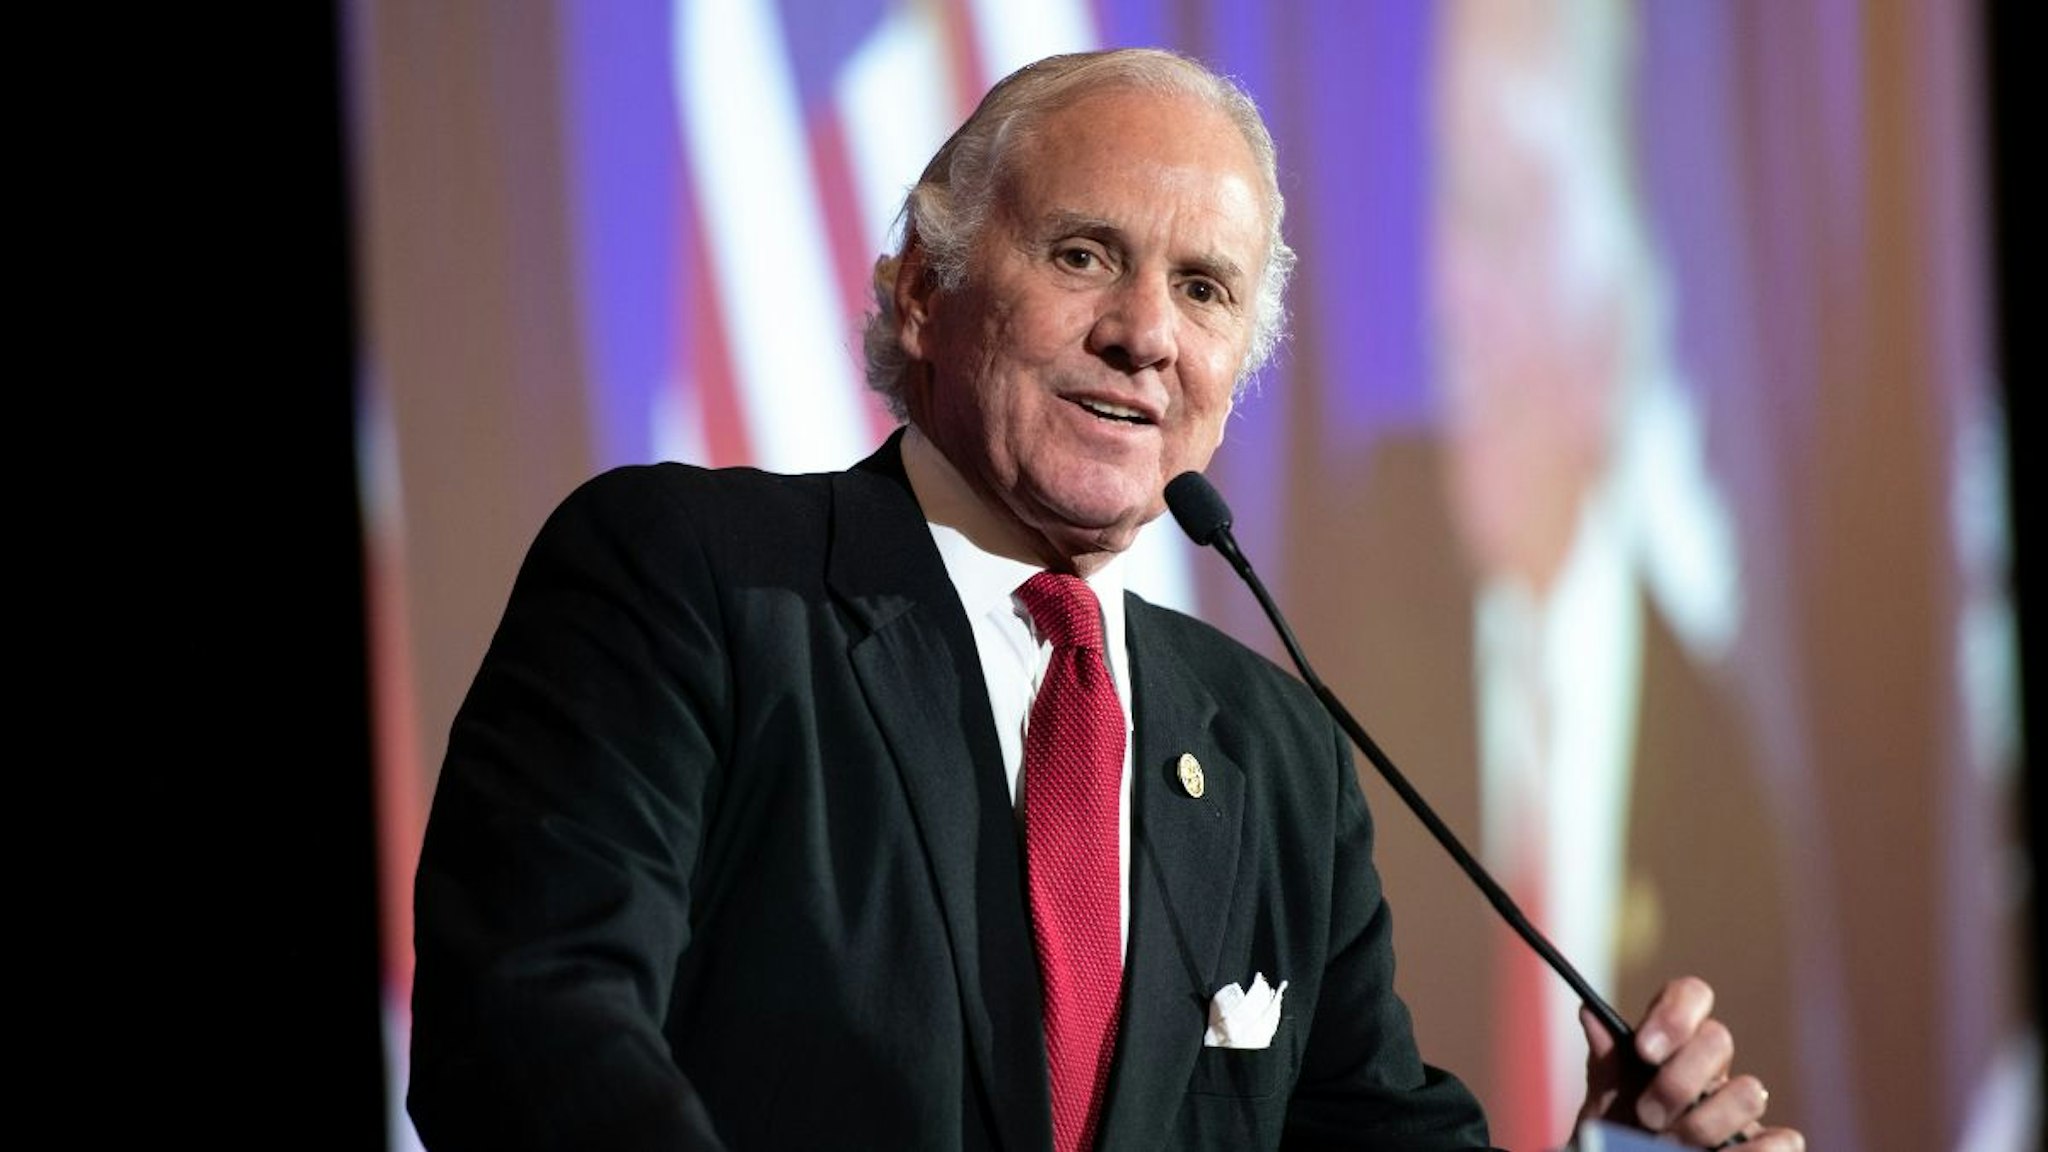 South Carolina Governor Henry McMaster speaks to a crowd during an election night party for Sen. Lindsey Graham (R-SC) on November 3, 2020 in Columbia, South Carolina. Graham defeated Democratic U.S. Senate candidate Jaime Harrison.